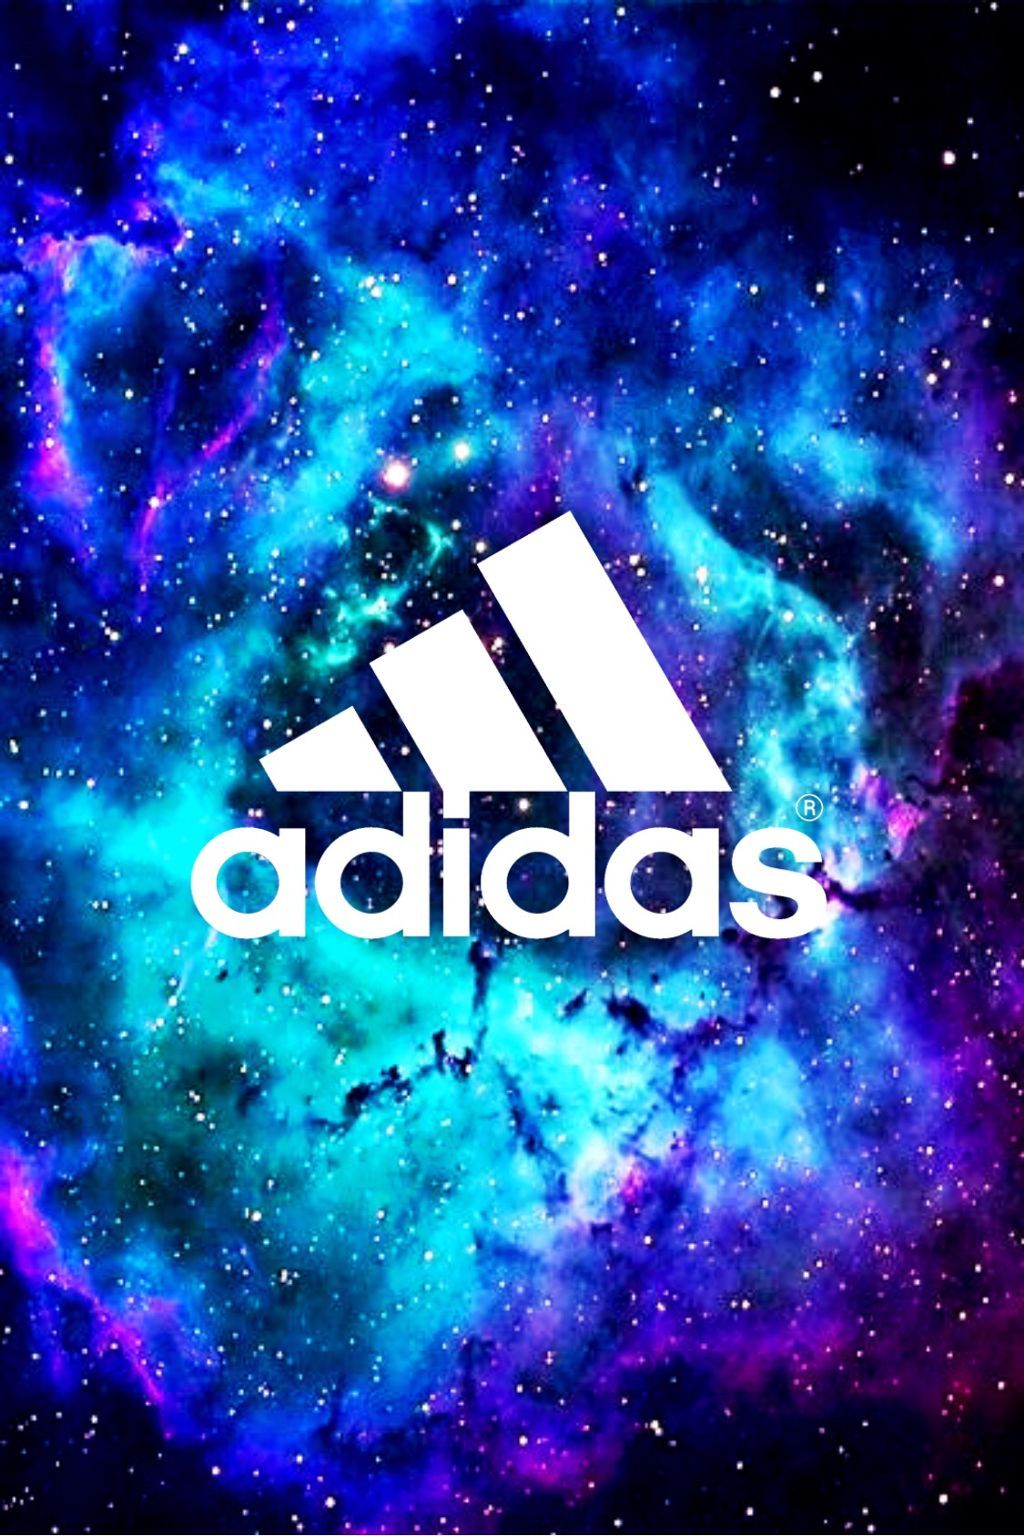 100+] Adidas Iphone Wallpapers | Wallpapers.com